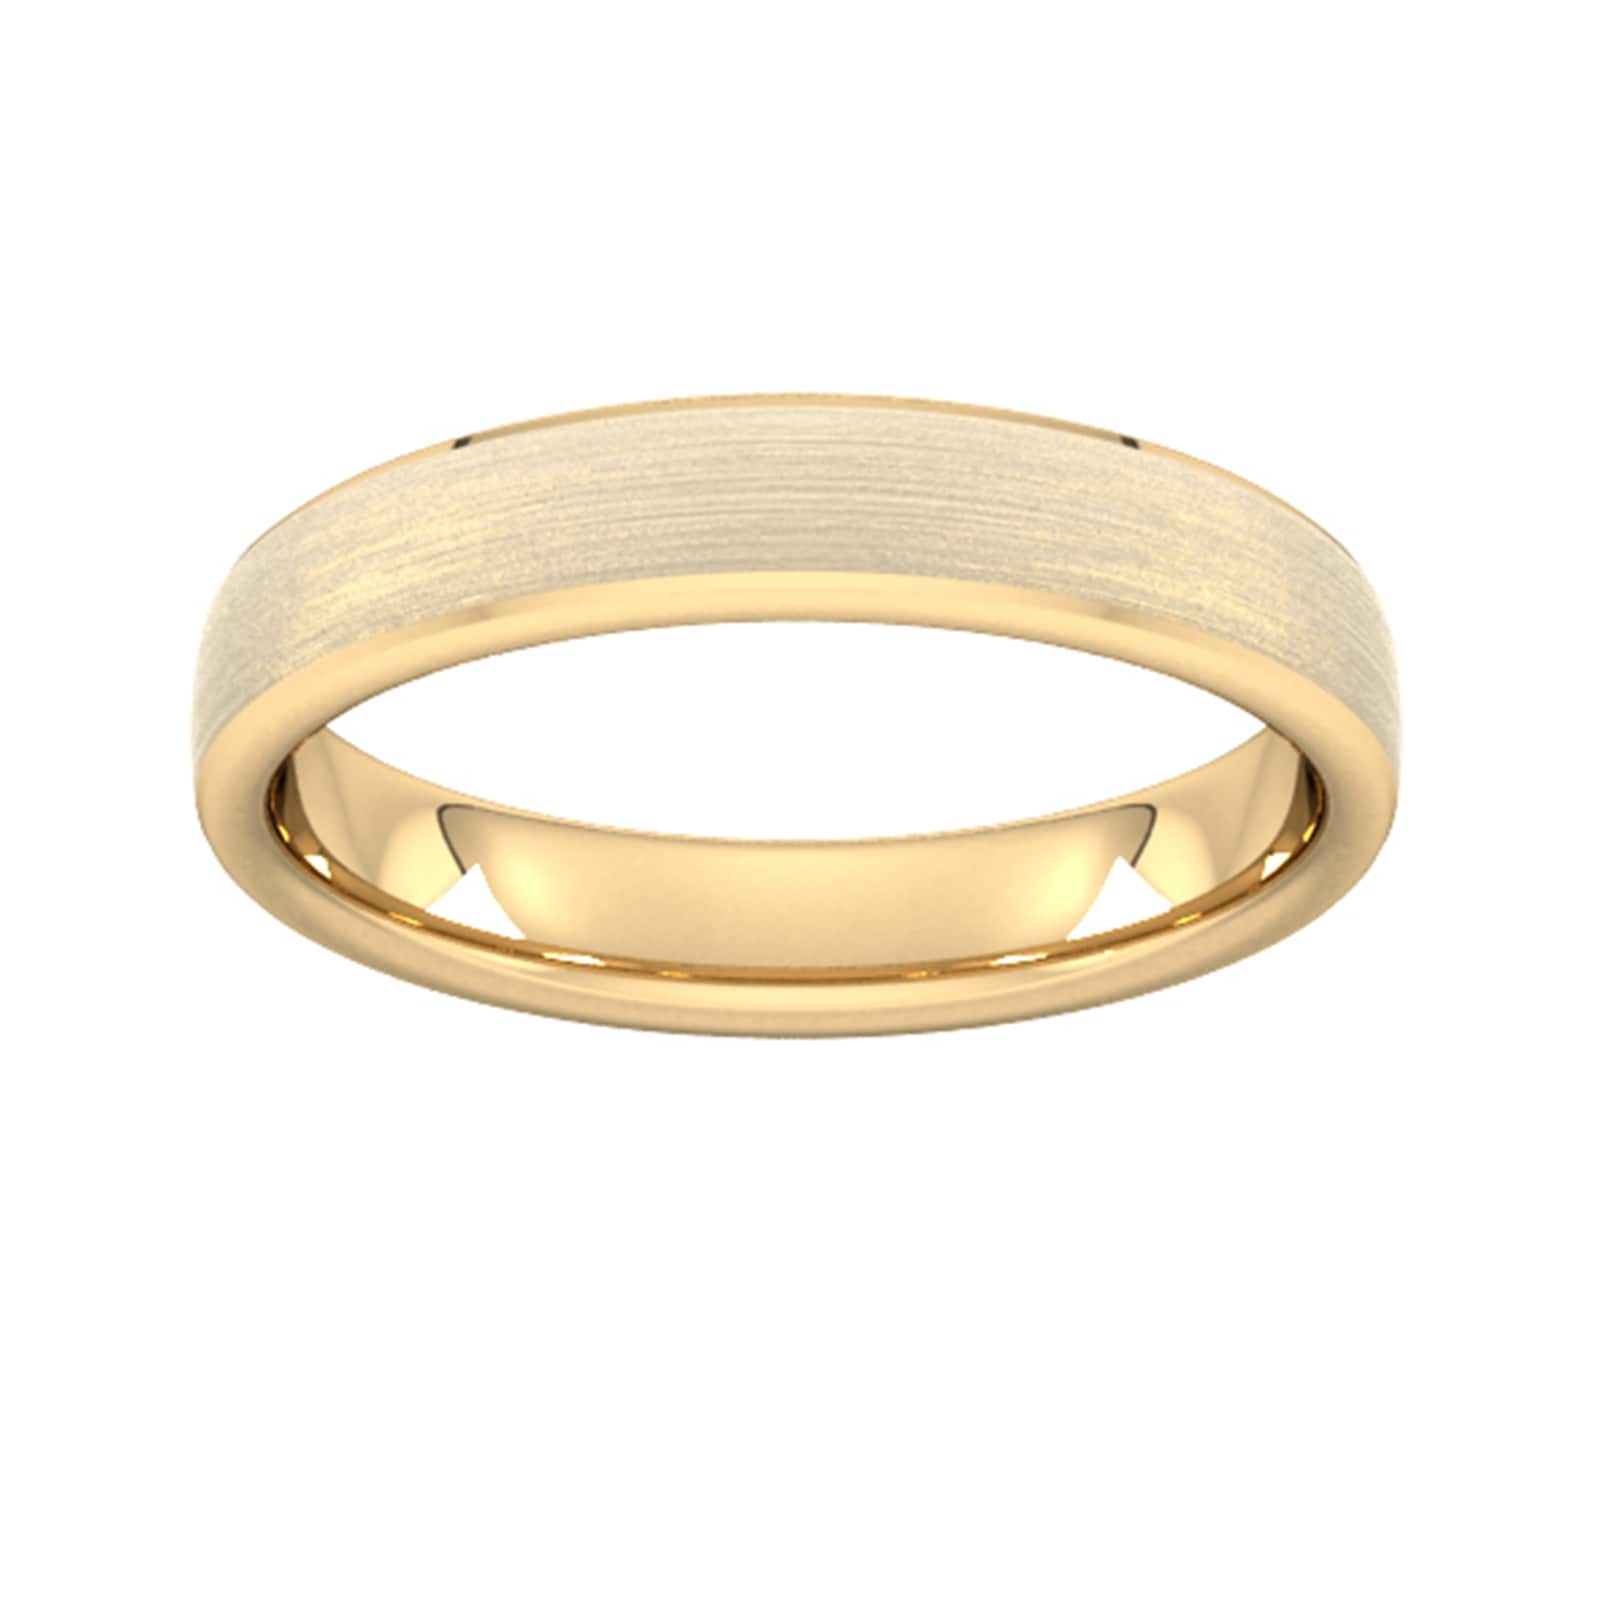 4mm Traditional Court Standard Polished Chamfered Edges With Matt Centre Wedding Ring In 18 Carat Yellow Gold - Ring Size R